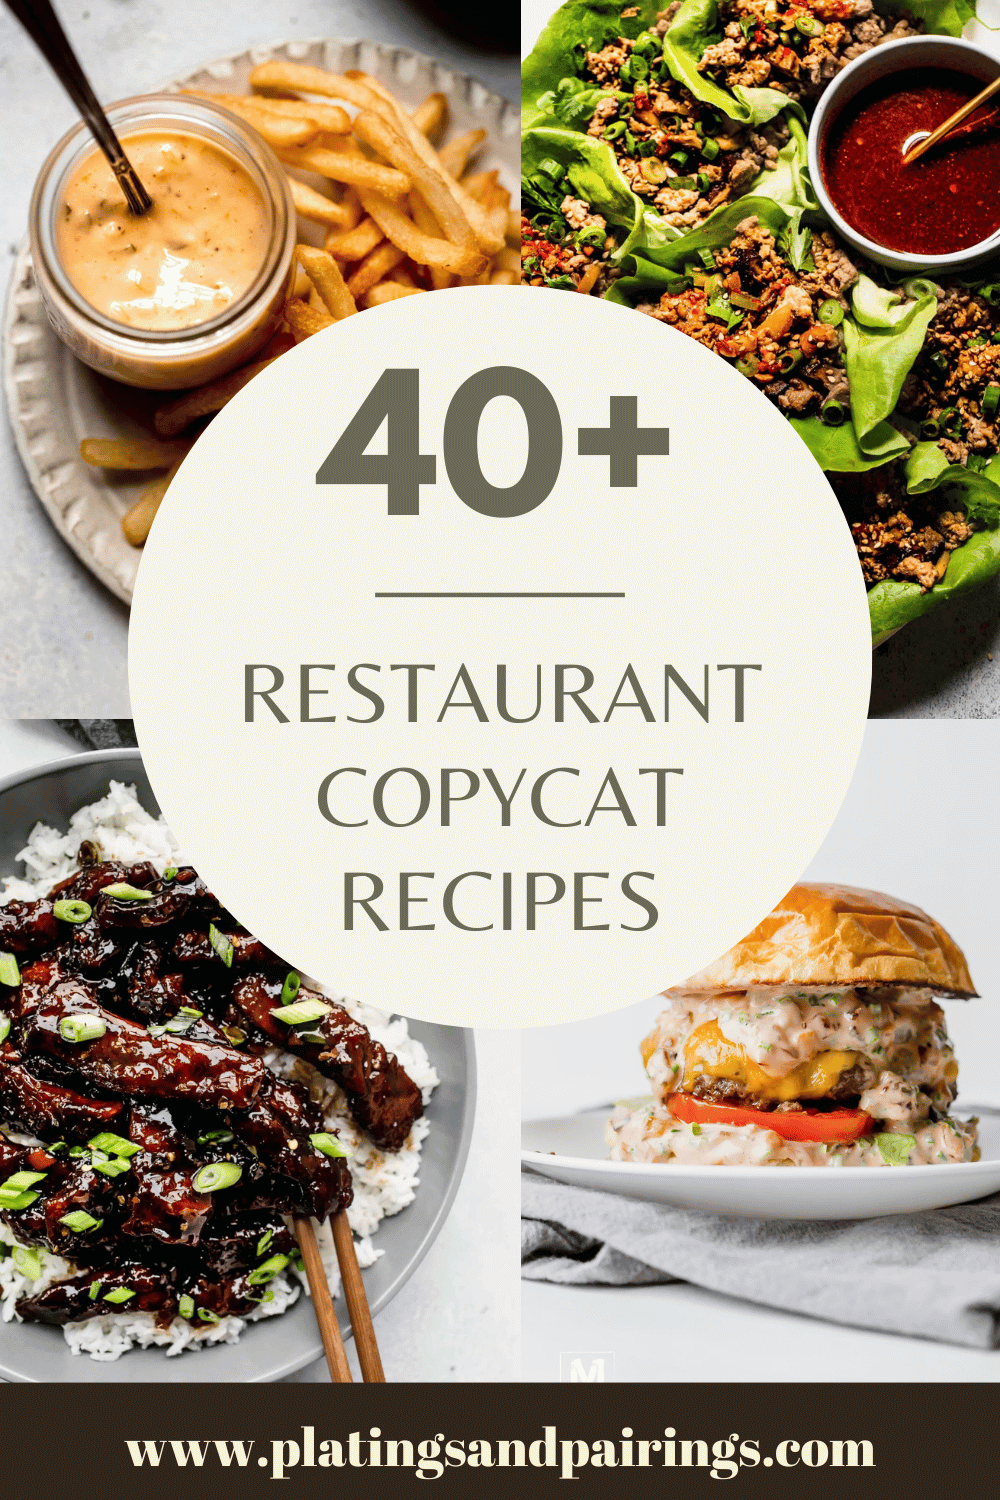 Collage of restaurant copycat recipes with text overlay.